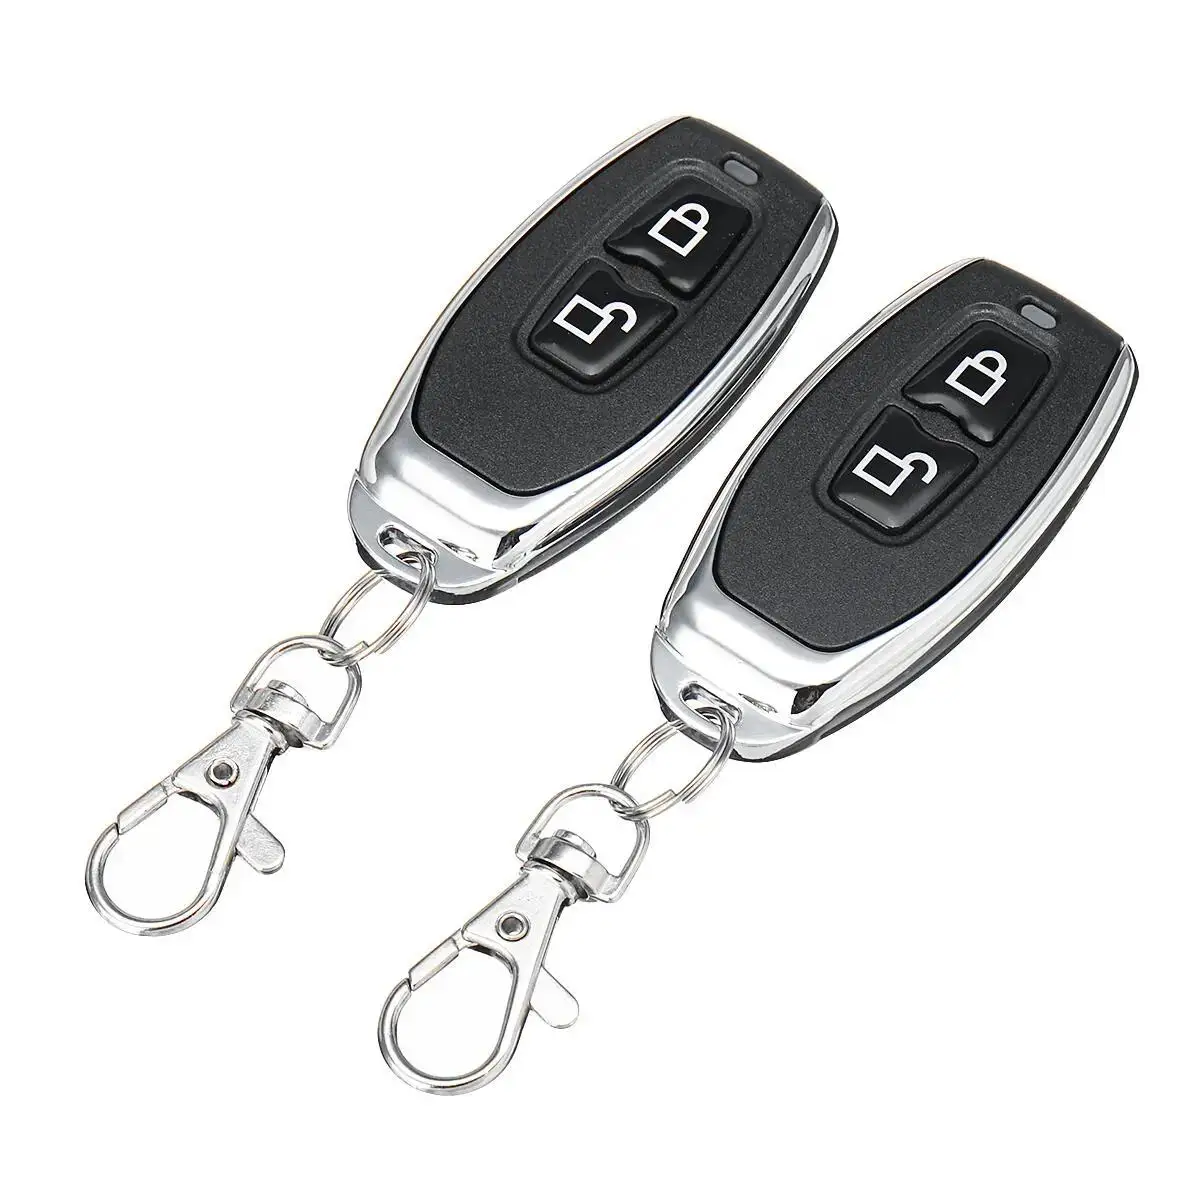 

433Mhz Wireless Remote Control 2 buttons EV 1527 Learning Code Transmitter Key Fob for Gate Garage Door controller No Clone